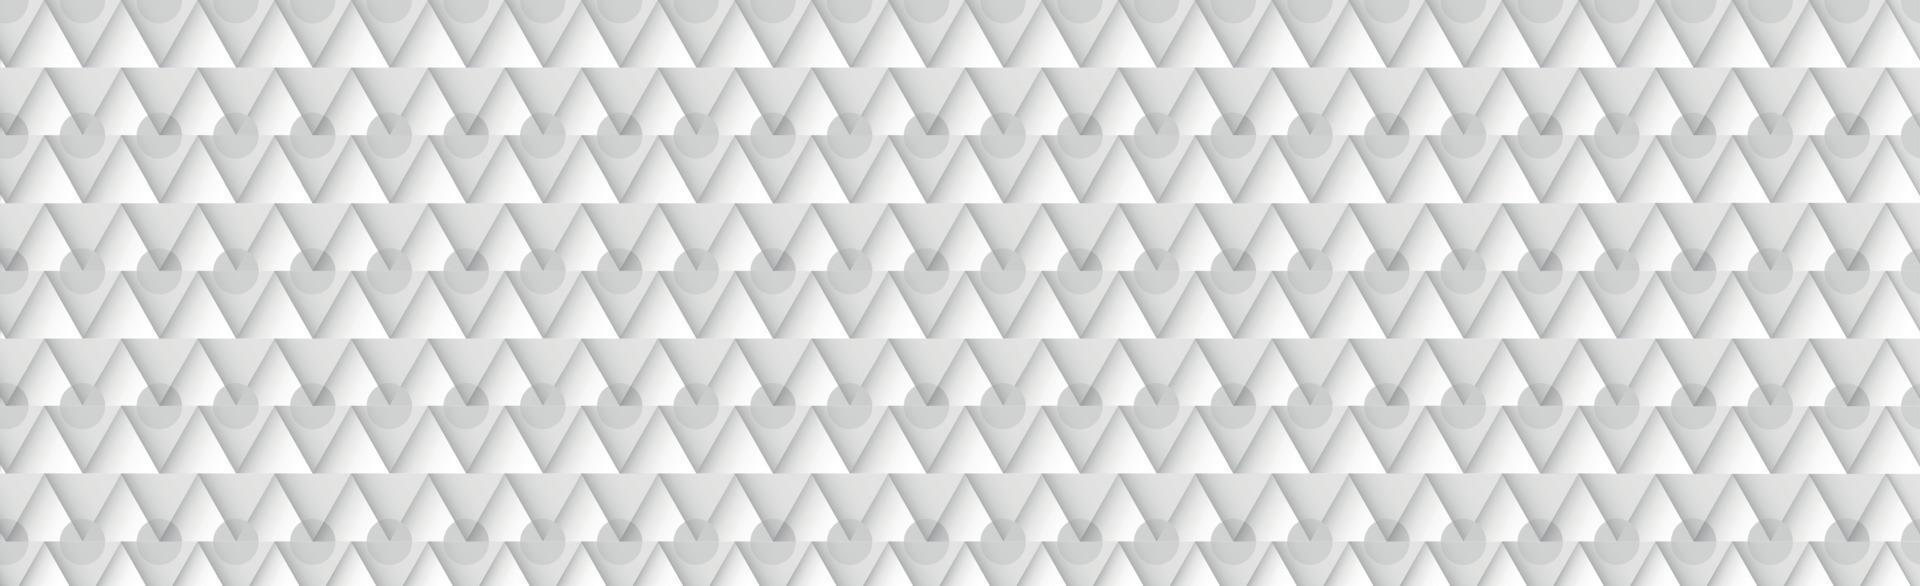 Abstract background gray - white volumetric rectangles - Vector